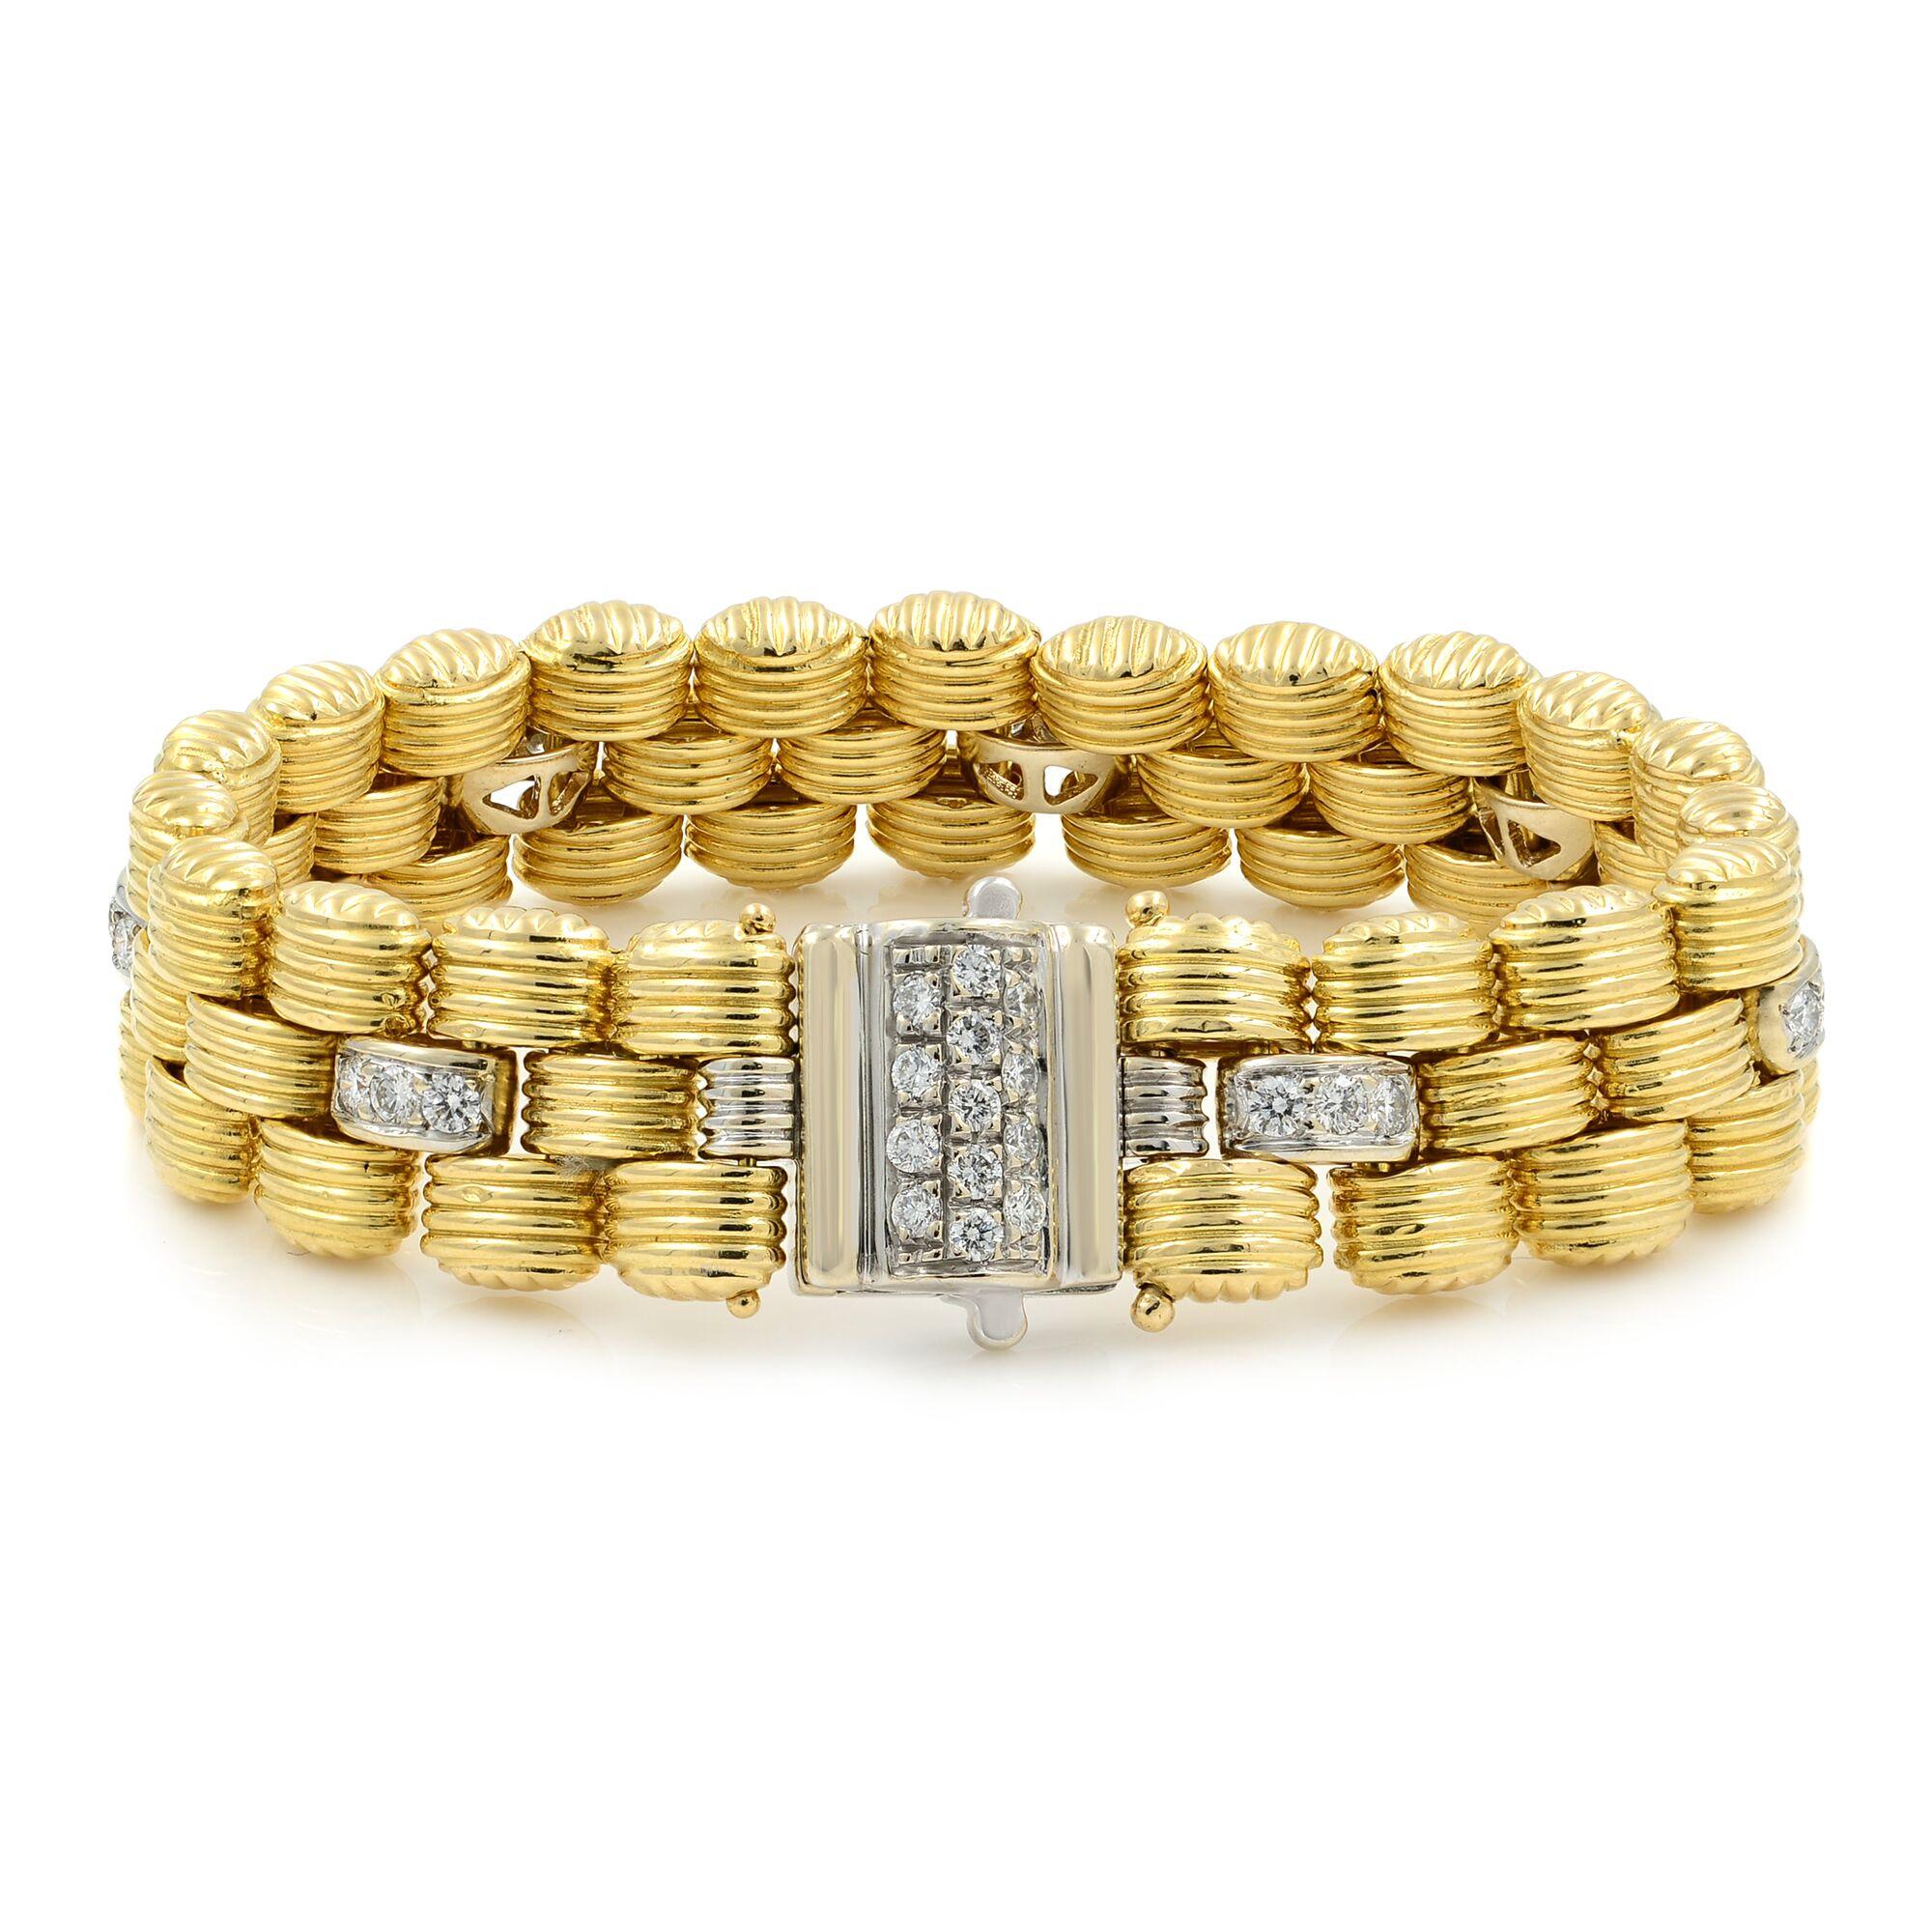 Vintage 18K Yellow Gold Link Bracelet with Diamonds. This unique link style bracelet is decorated with 34 round brilliant-cut diamonds, weighing a total of approximately 1.50cts. Each stone is prong set. 7 inches in length, approximately 14mm in